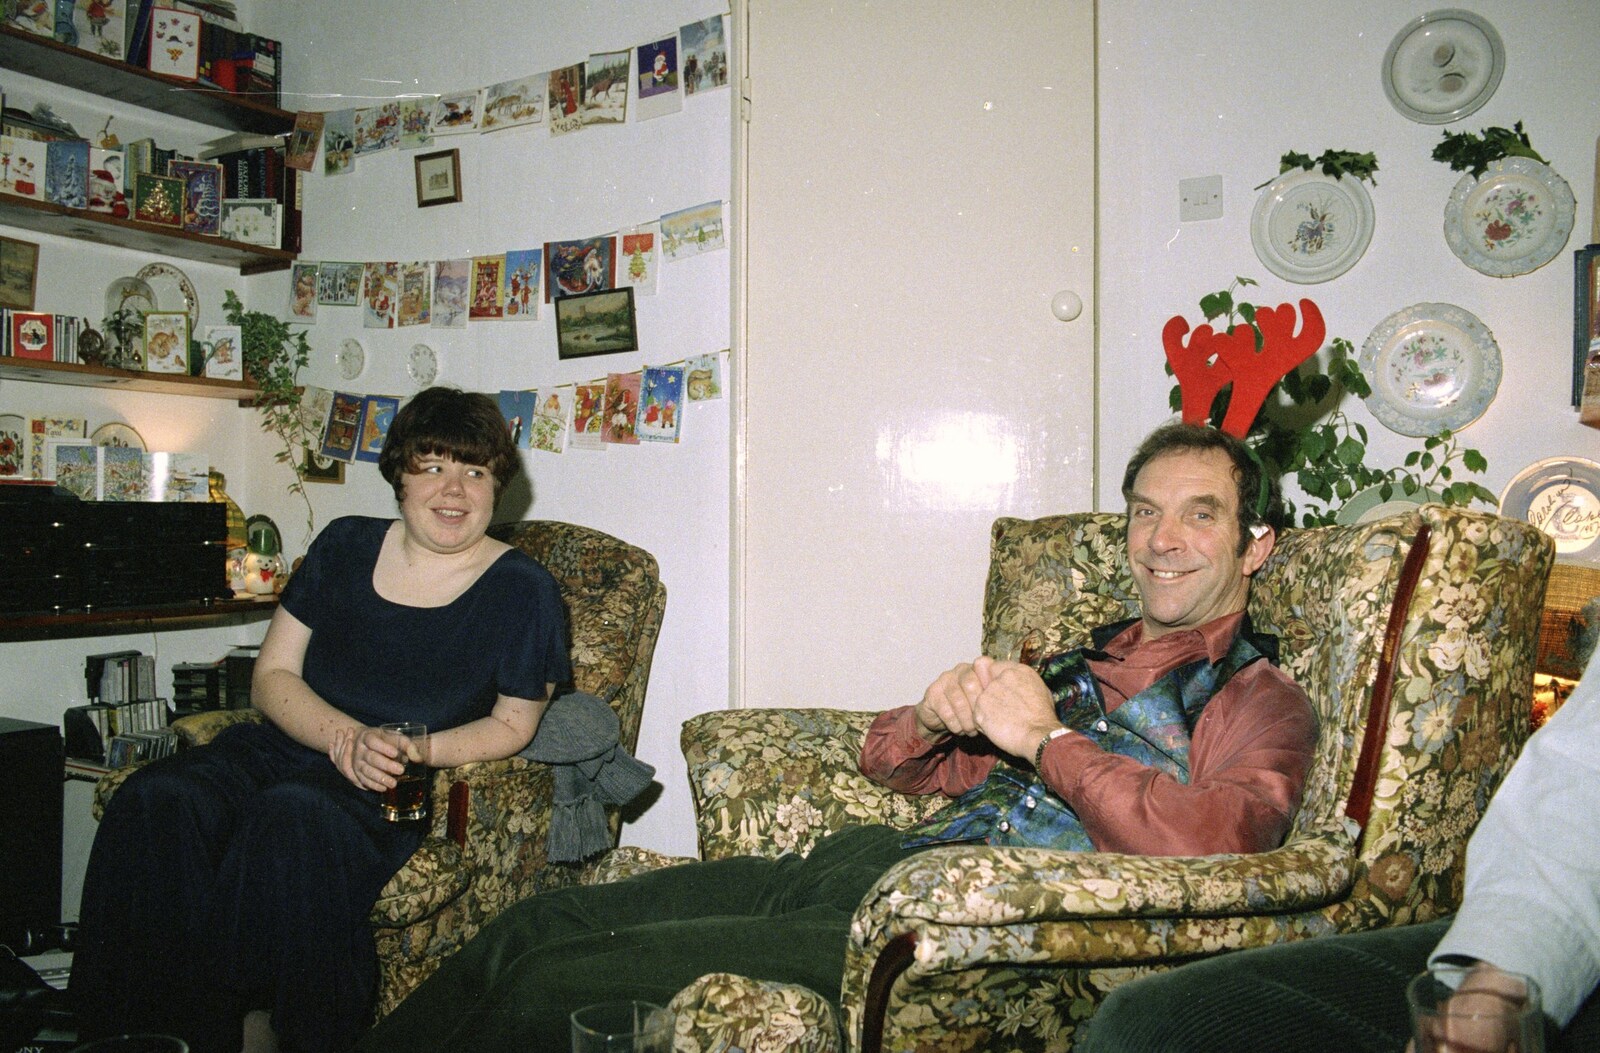 Sis and Mike, with comedy reindeer antlers from Christmas Down South, Burton and Walkford, Dorset - 25th December 1994